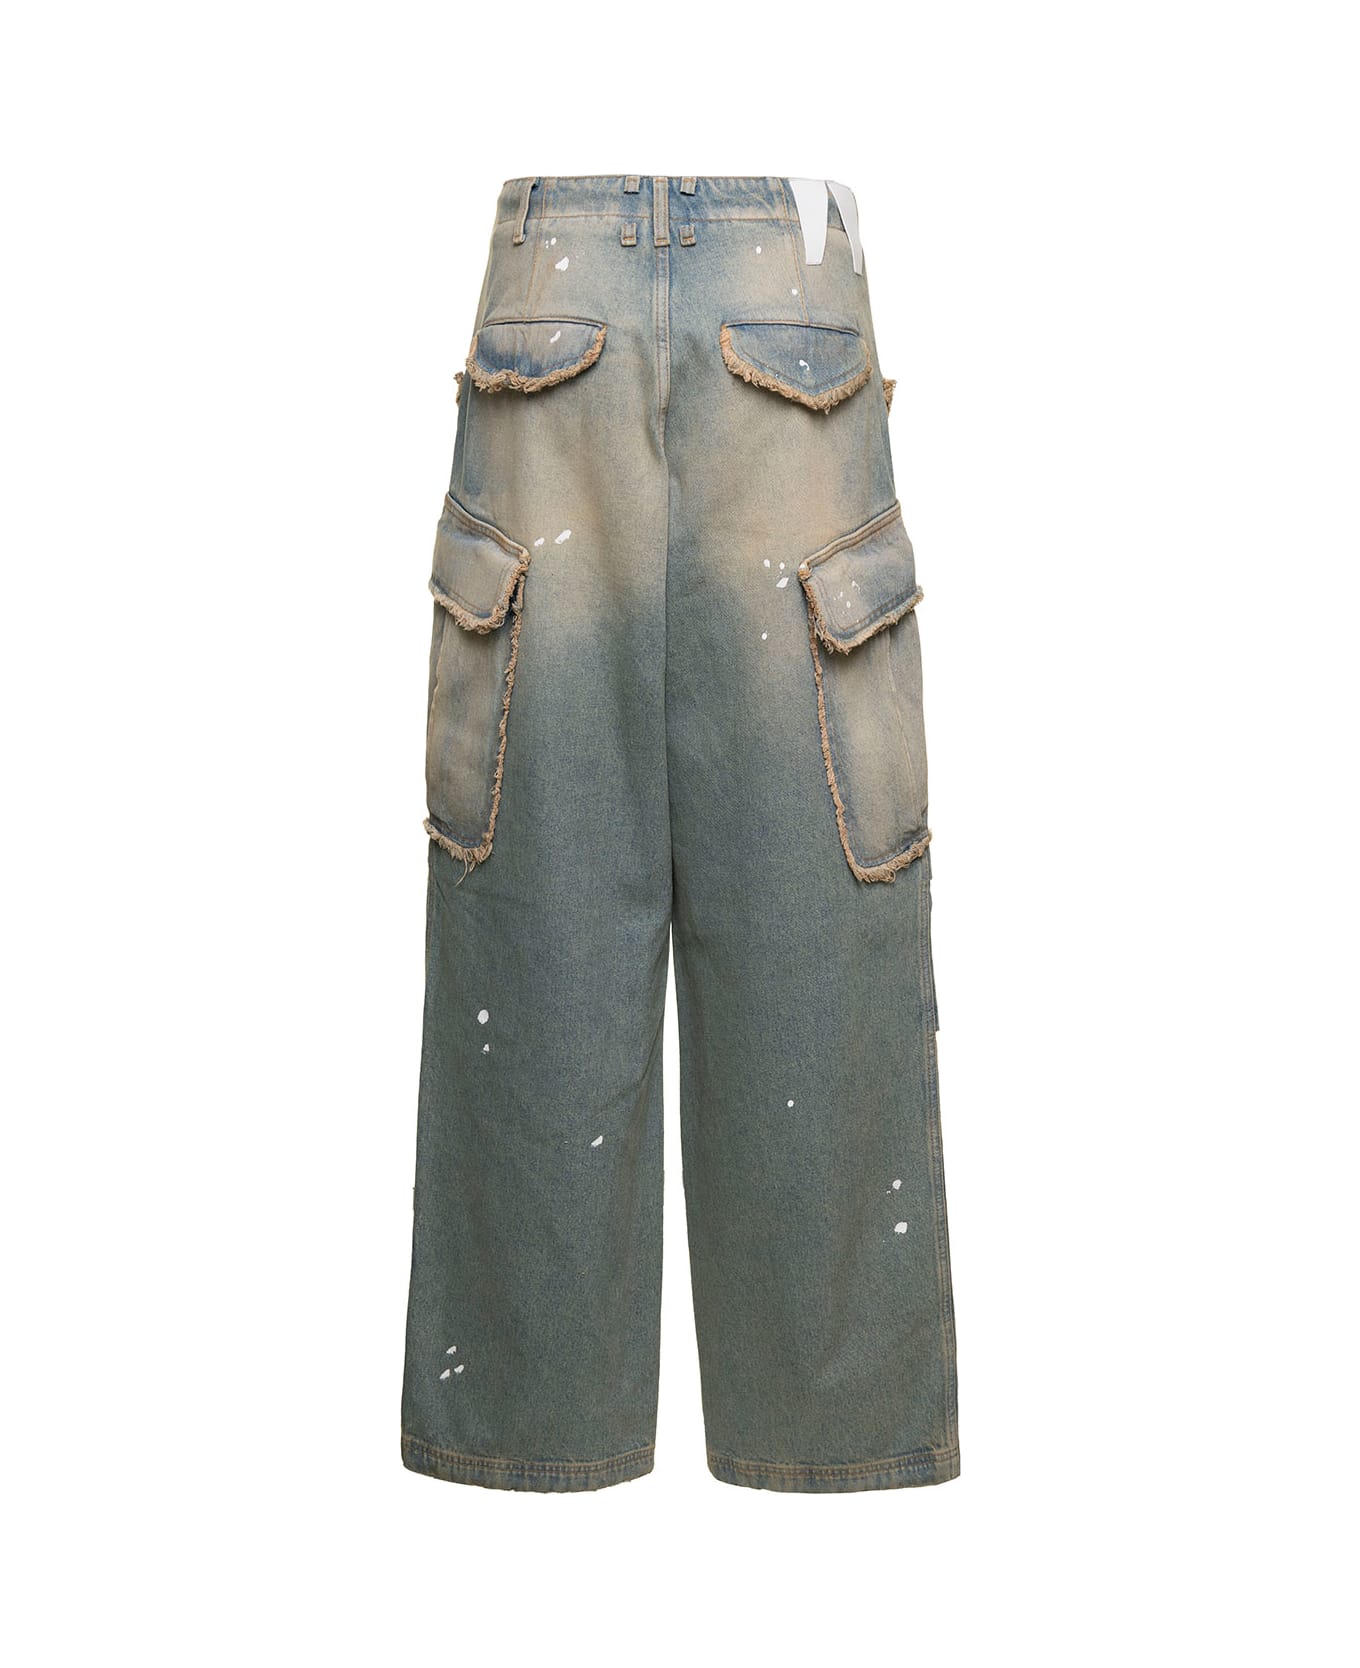 DARKPARK 'vivi' Light Blue Cargo Jeans With Bleached Effect And Paint Stains In Cotton Denim Woman - Light blue